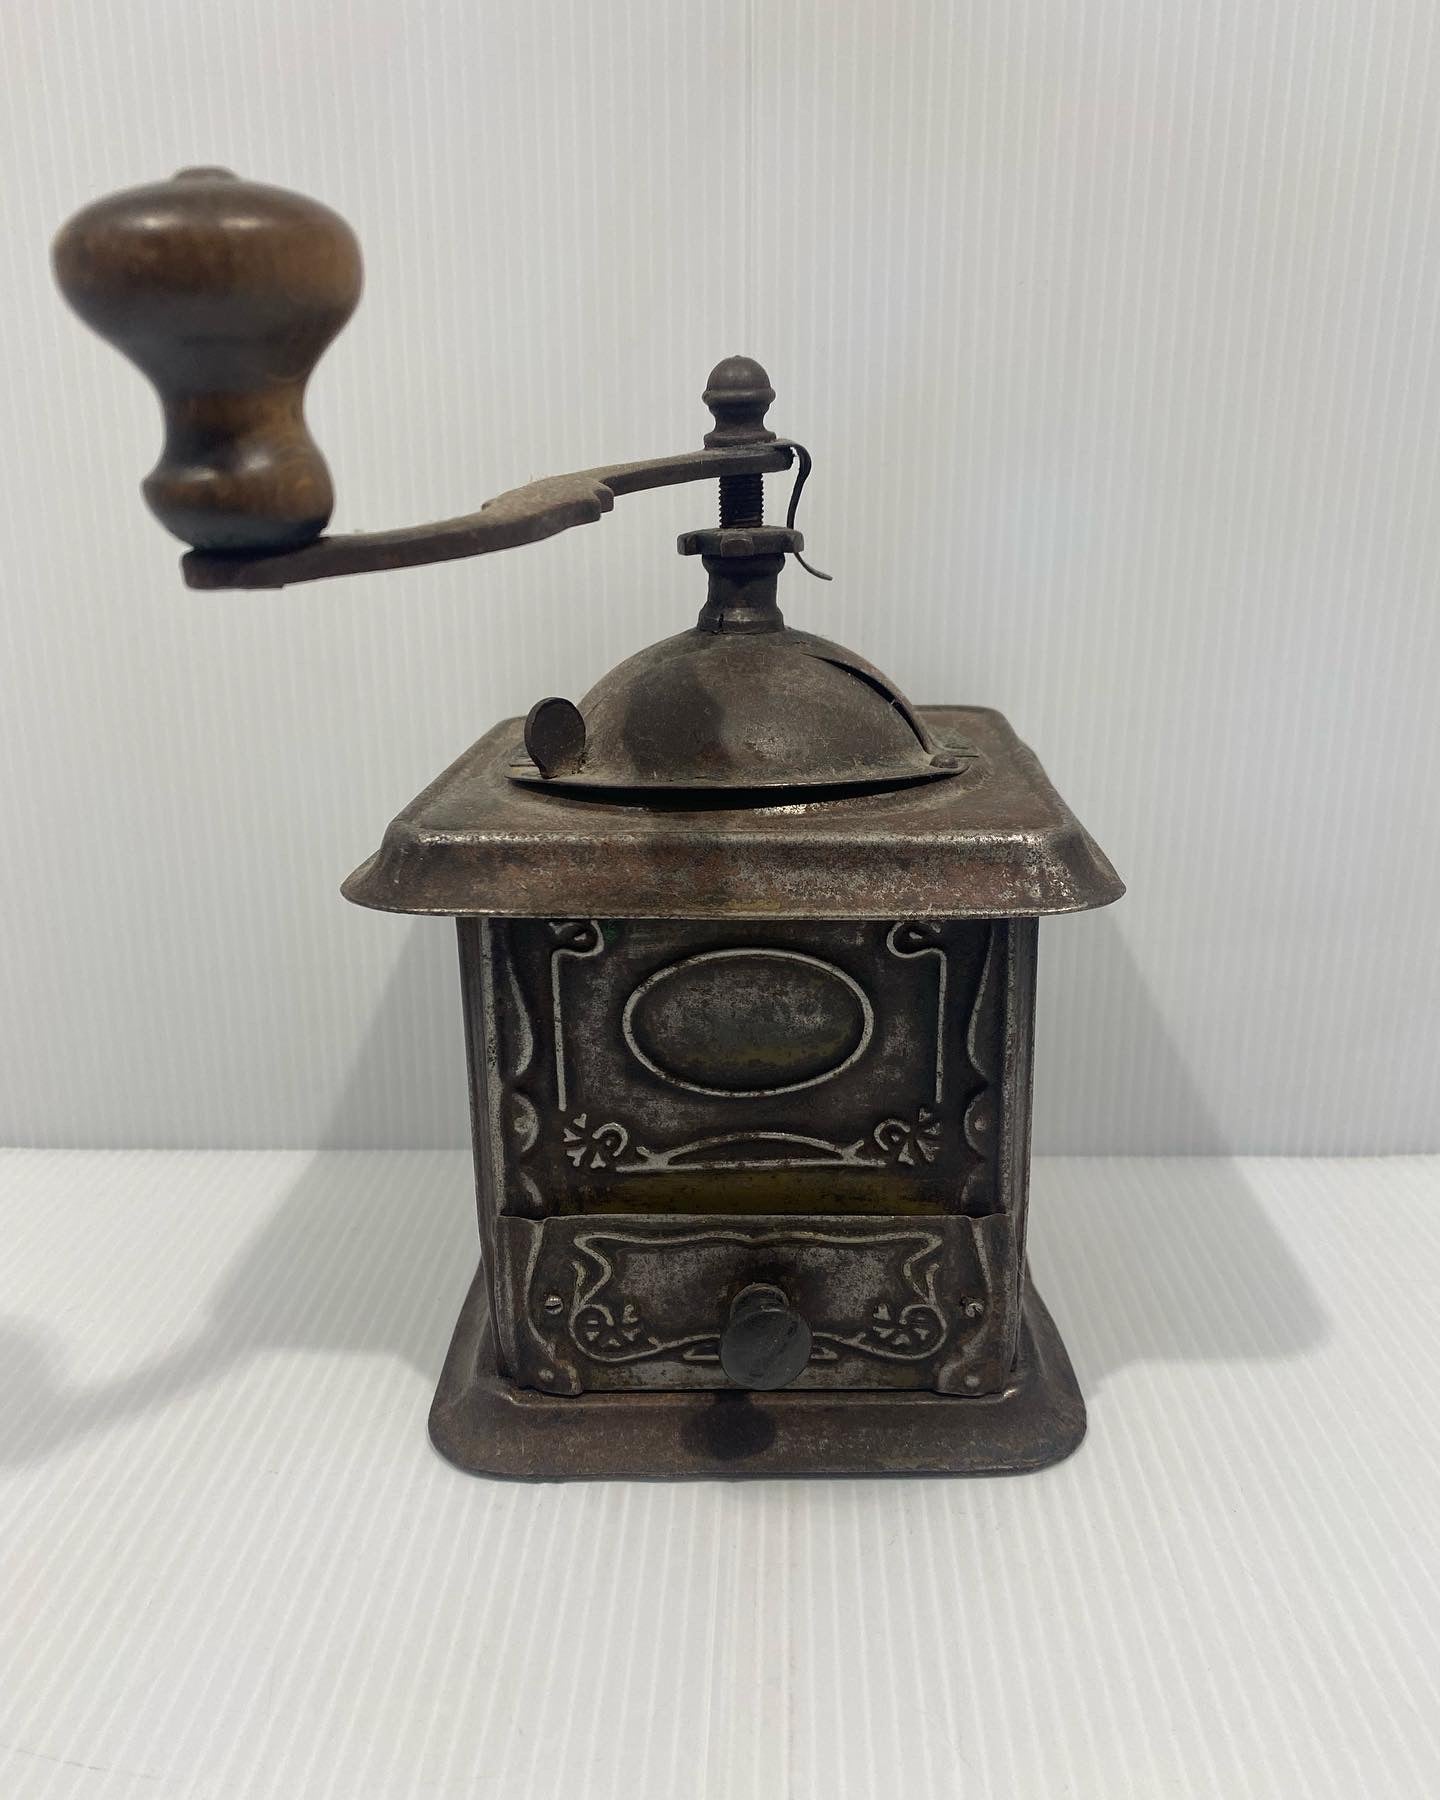 Italian coffee grinder made in the 1930s’s